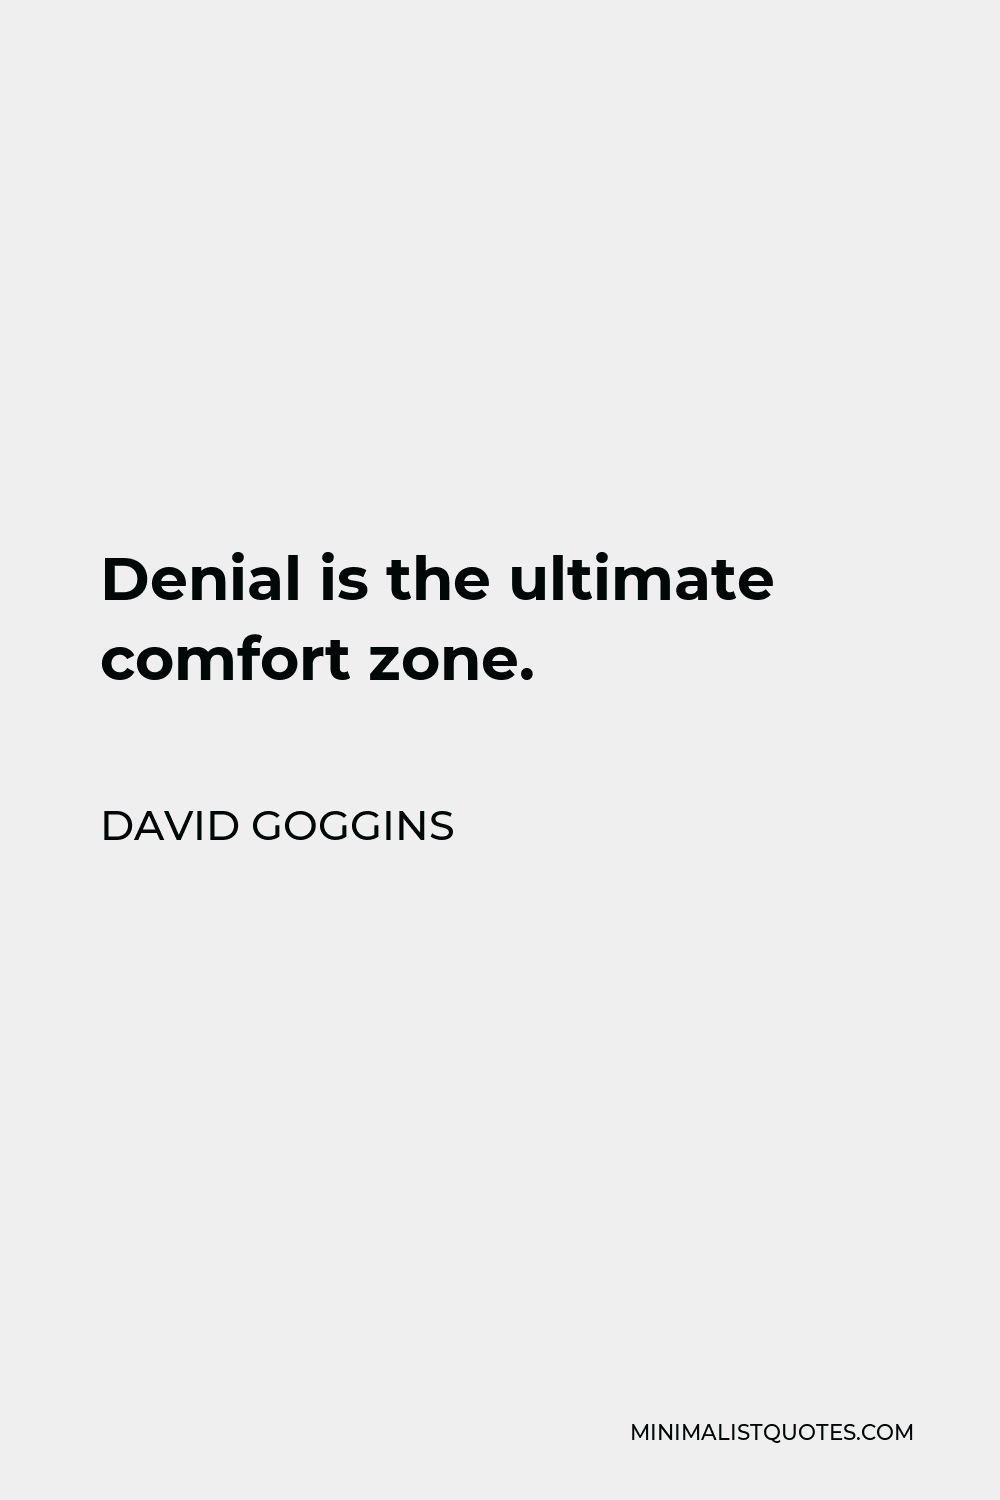 David Goggins Quote Denial Is The Ultimate Comfort Zone